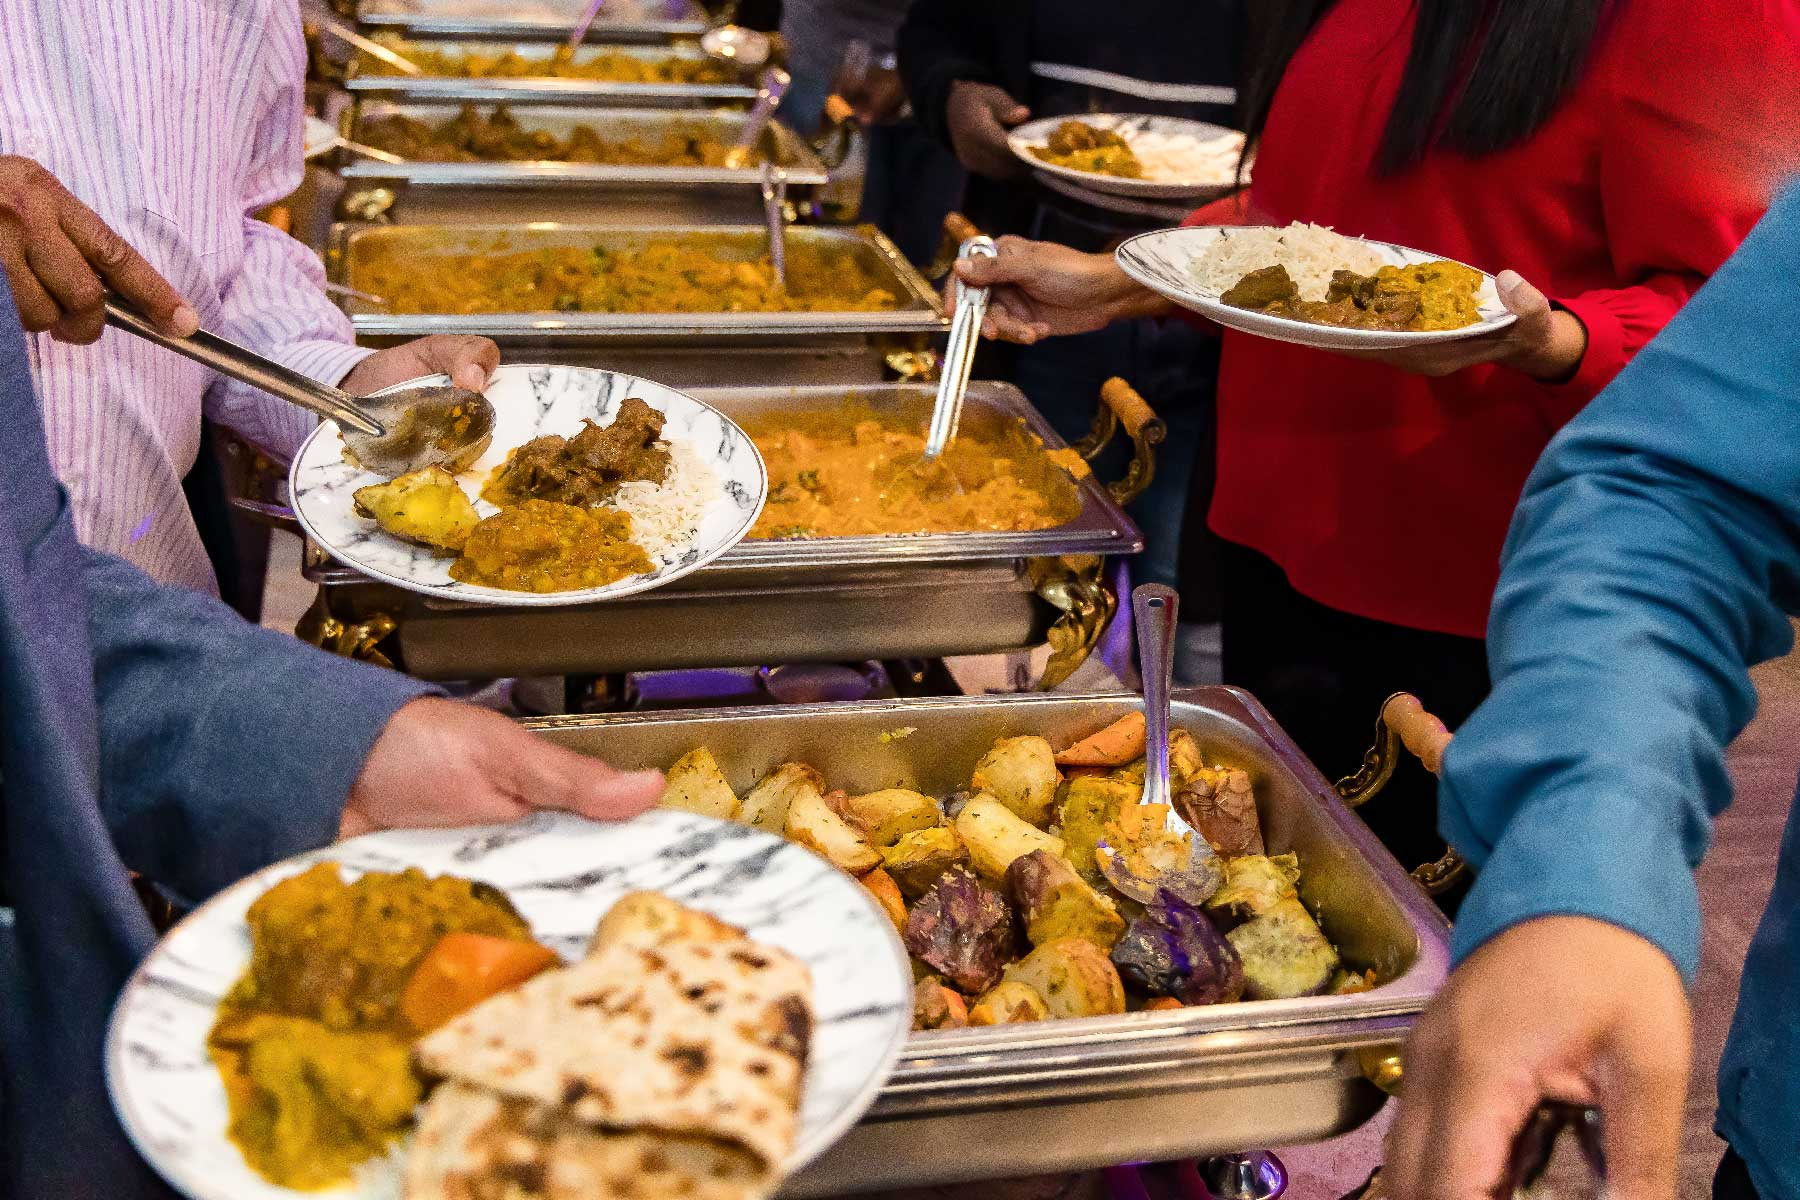 Factors to Consider When Hiring an Indian Caterer